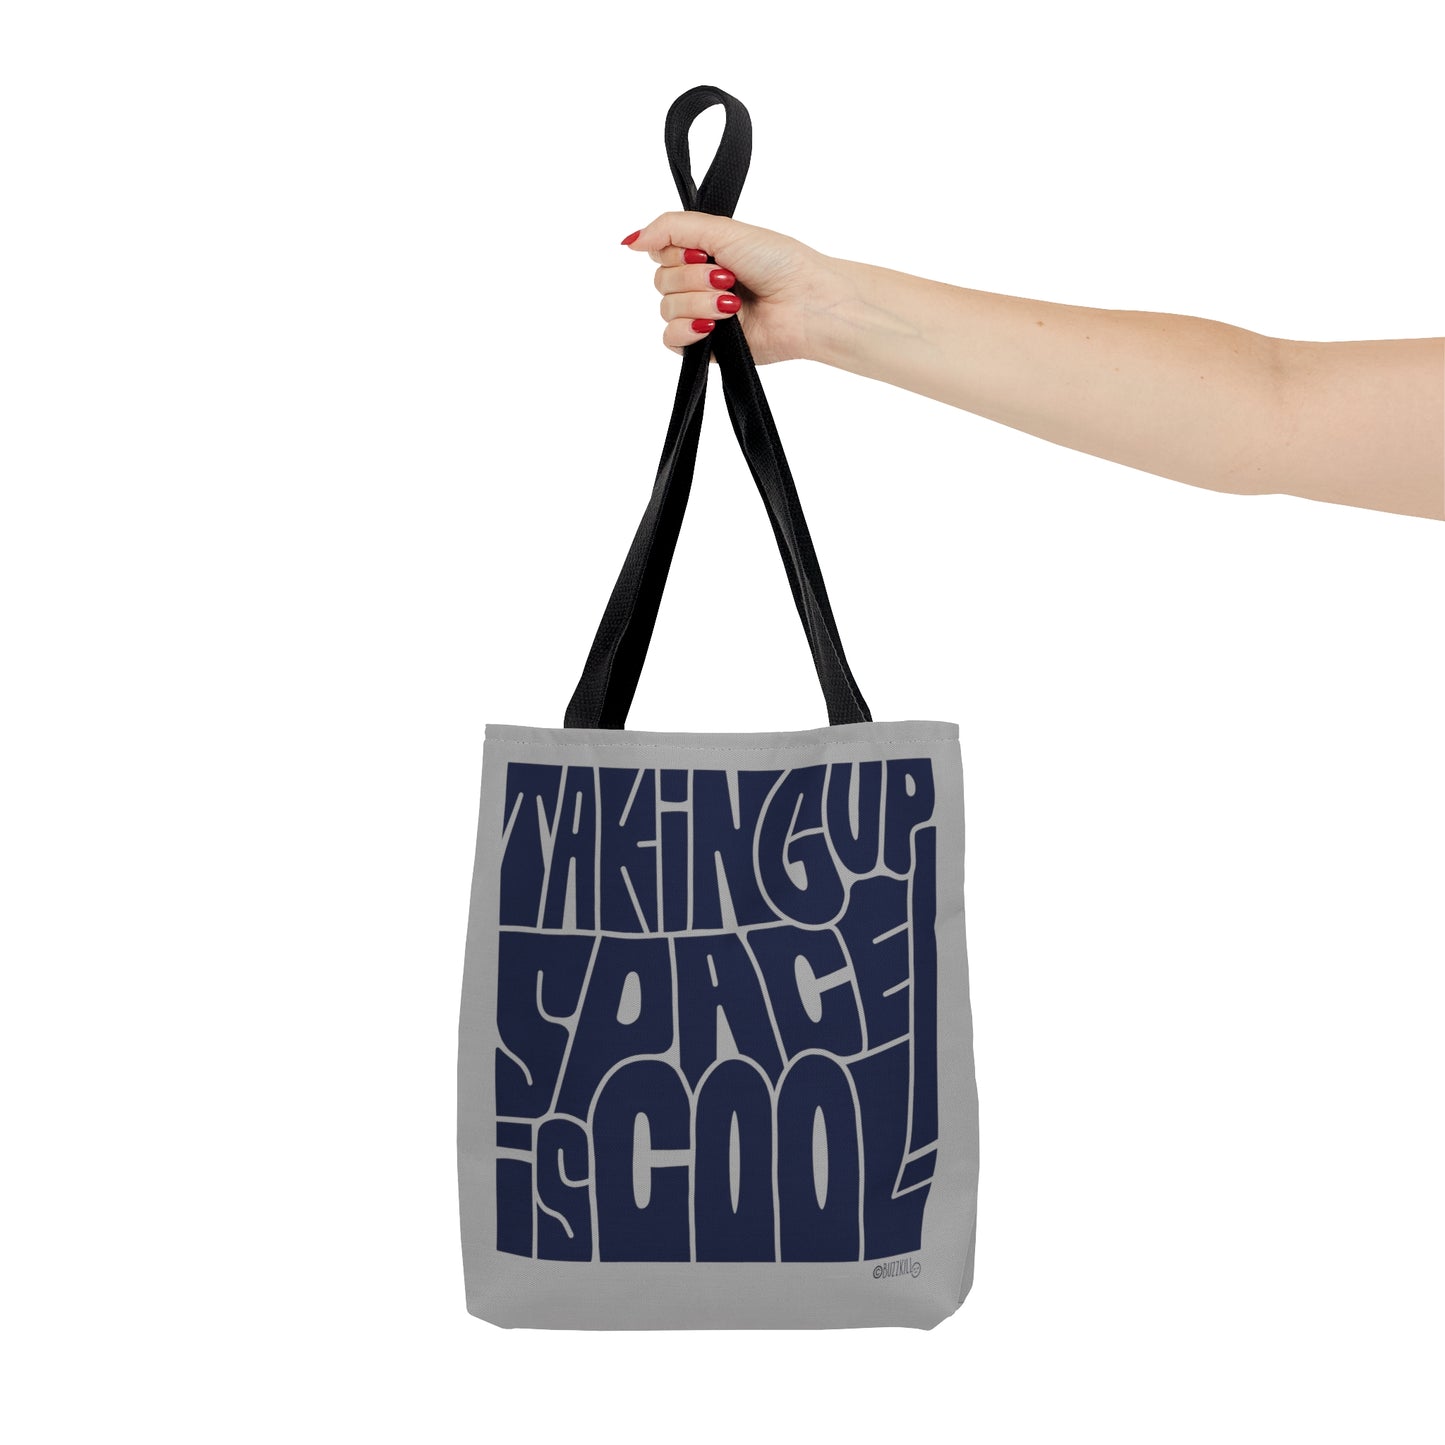 Taking Up Space Is Cool - Tote Bag